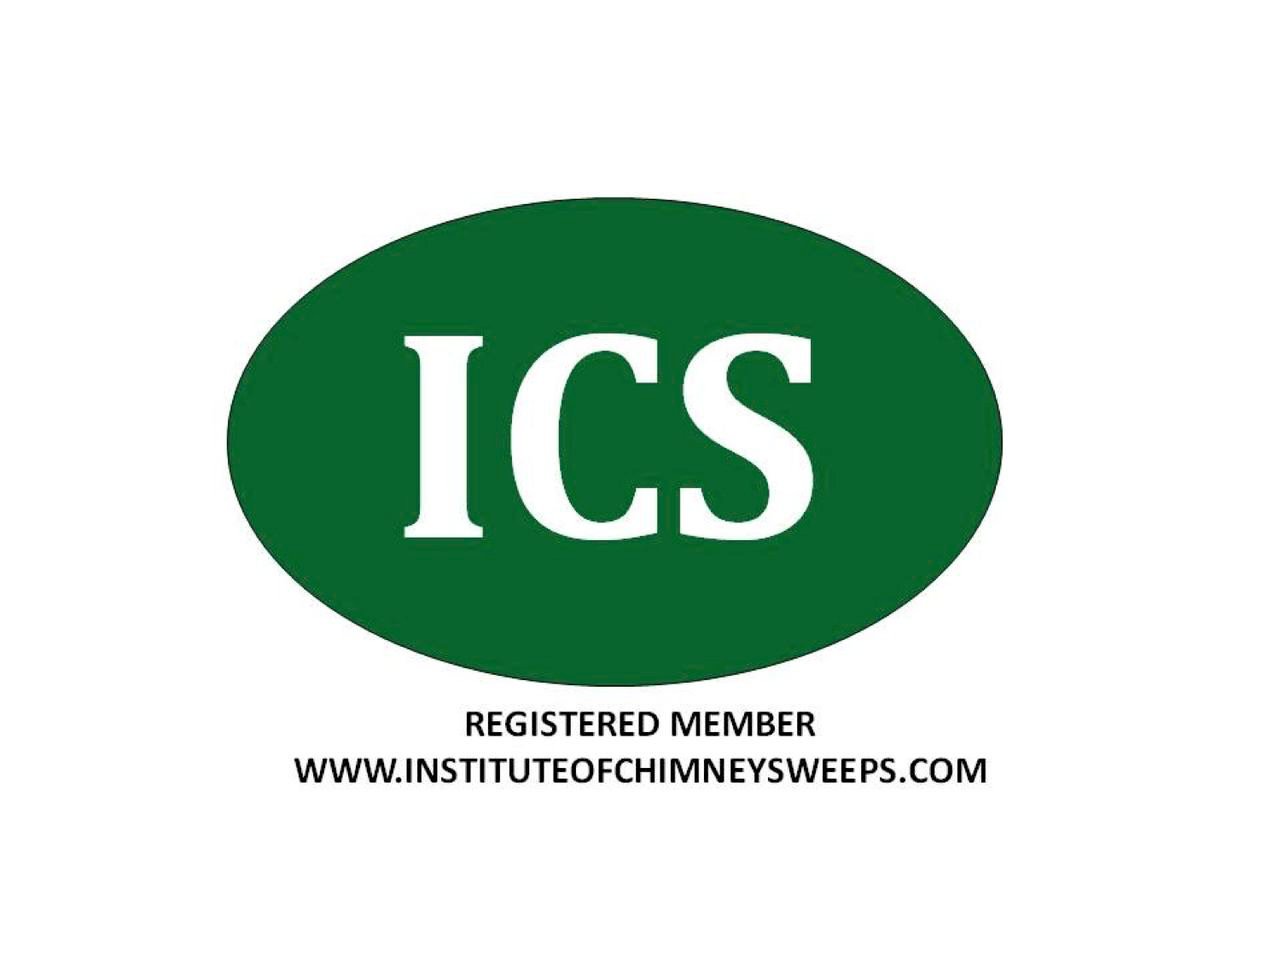 About - ICS Registered - Complete Sweep Chimney Services